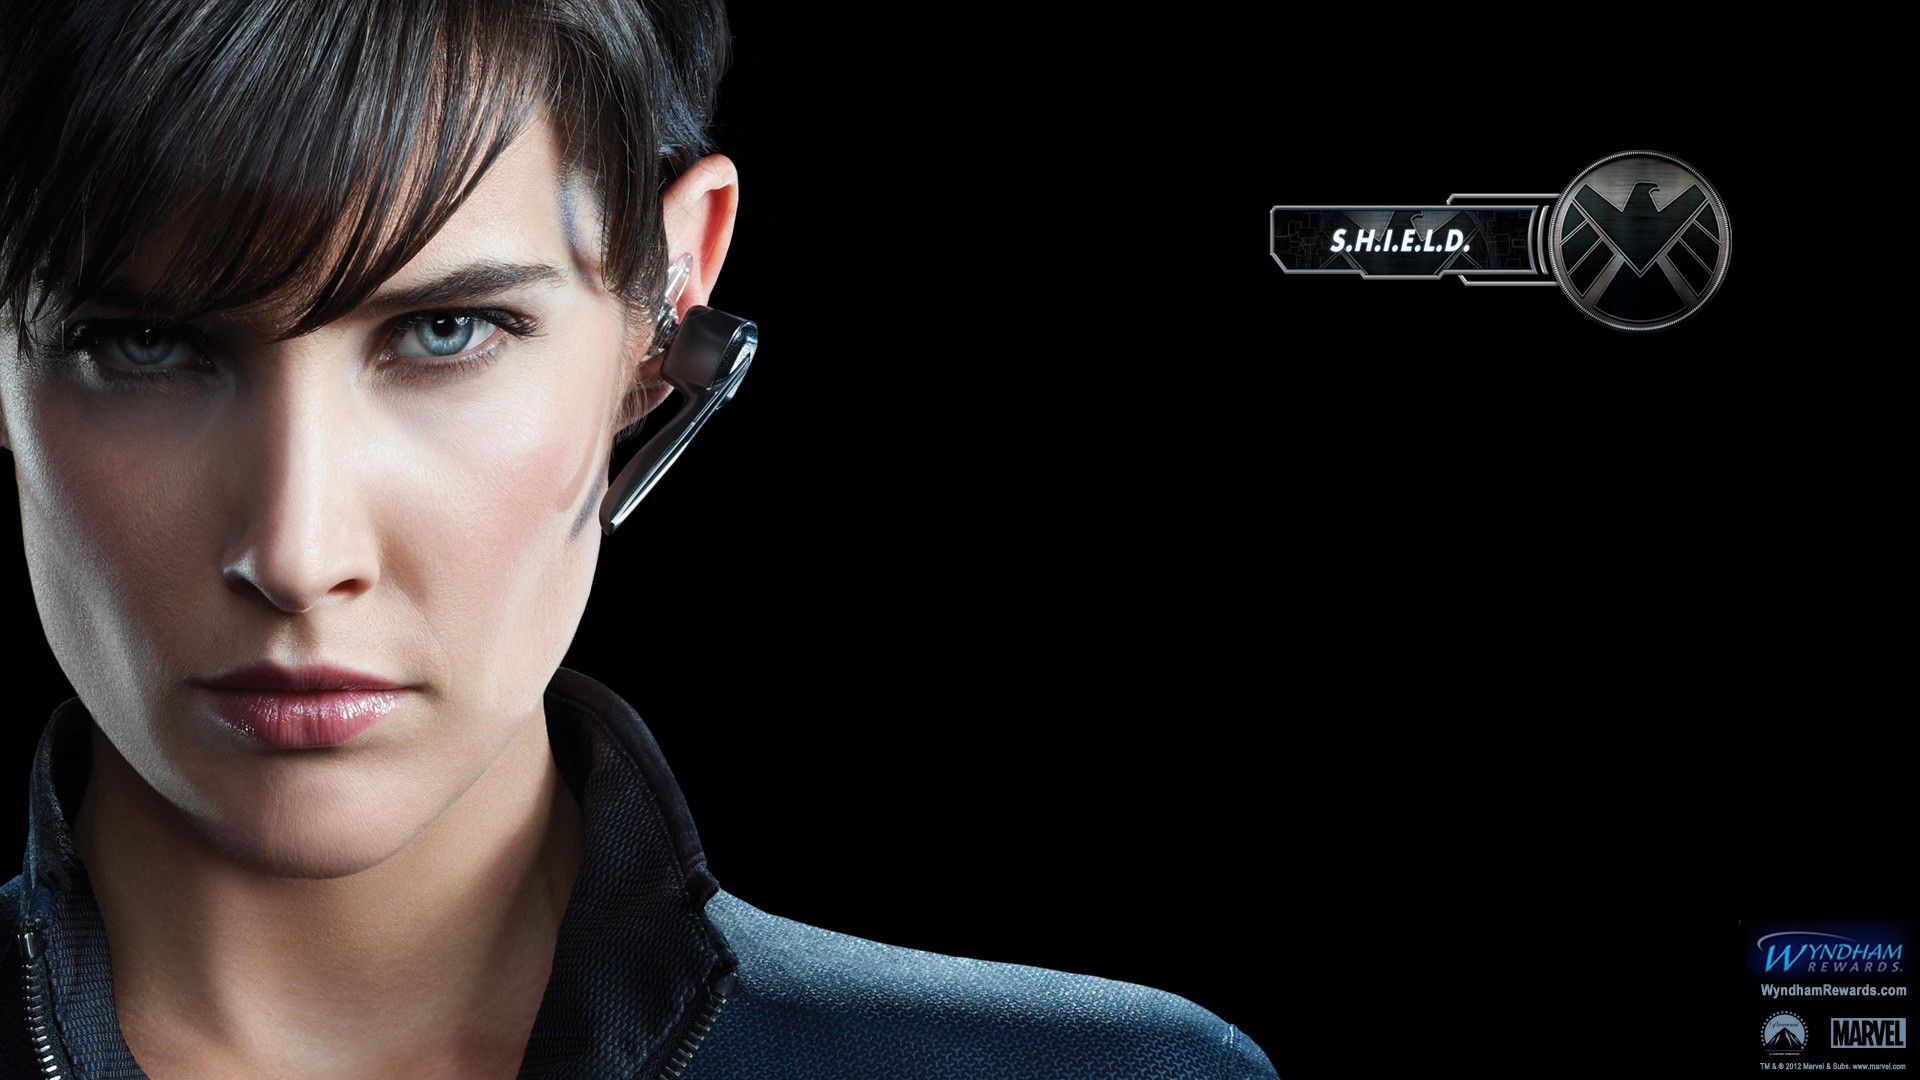 People 1920x1080 movies The Avengers Maria Hill Cobie Smulders S.H.I.E.L.D. women blue eyes dark hair Canadian women Marvel Cinematic Universe